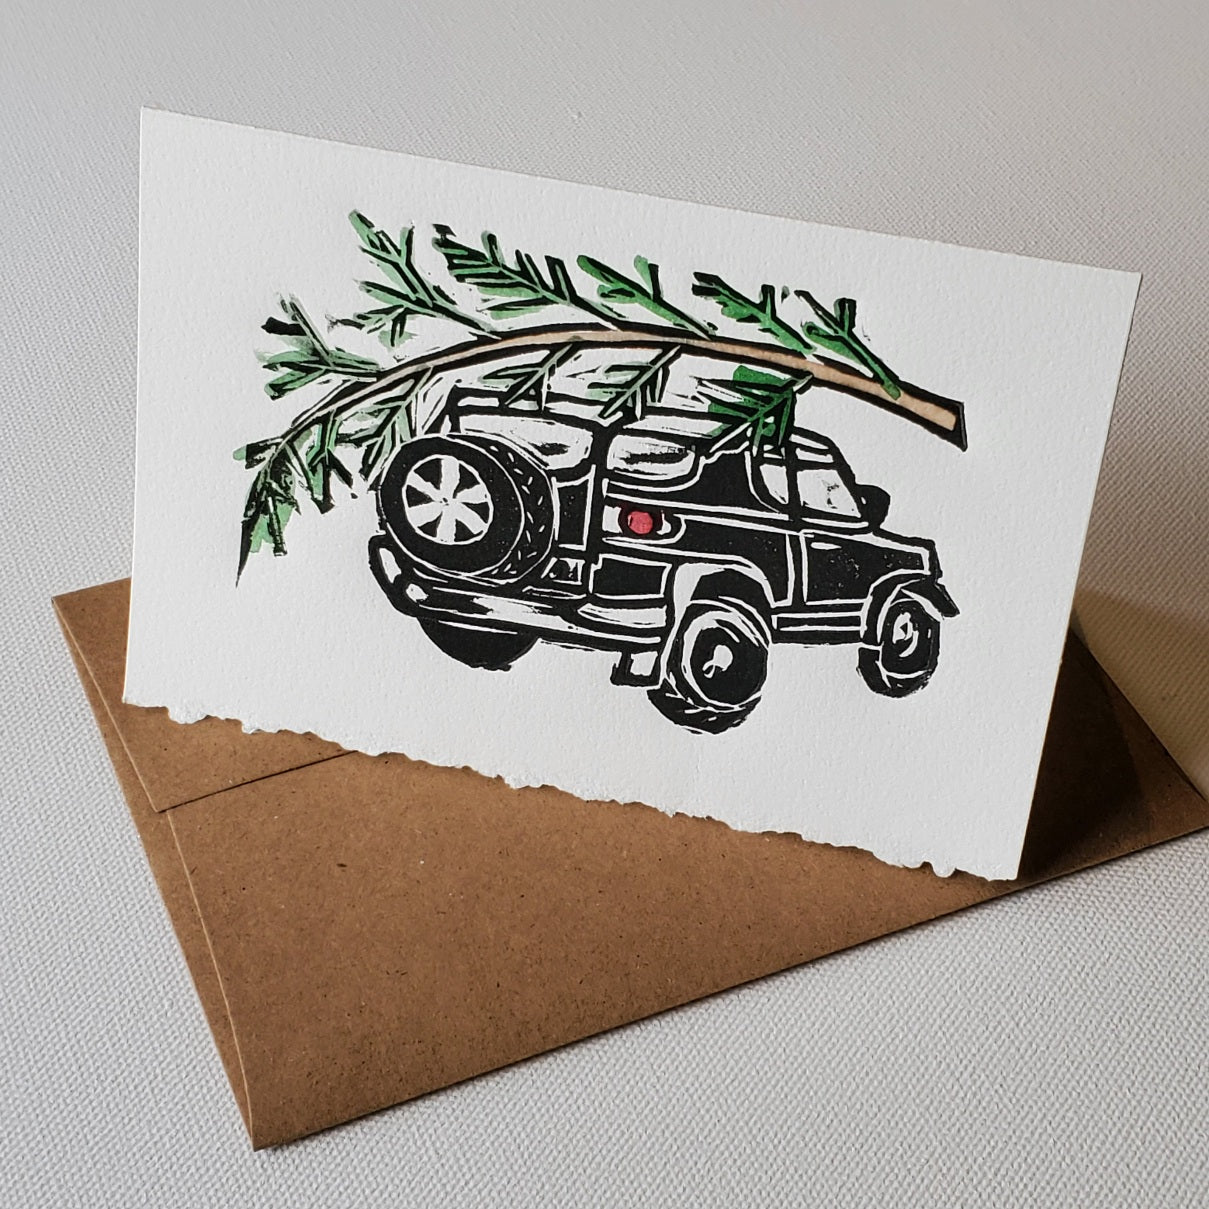 2007 Toyota FJ Cruiser with Christmas Tree tied to the roof rack.  This is an original lino-cut relief print by Janet Davis